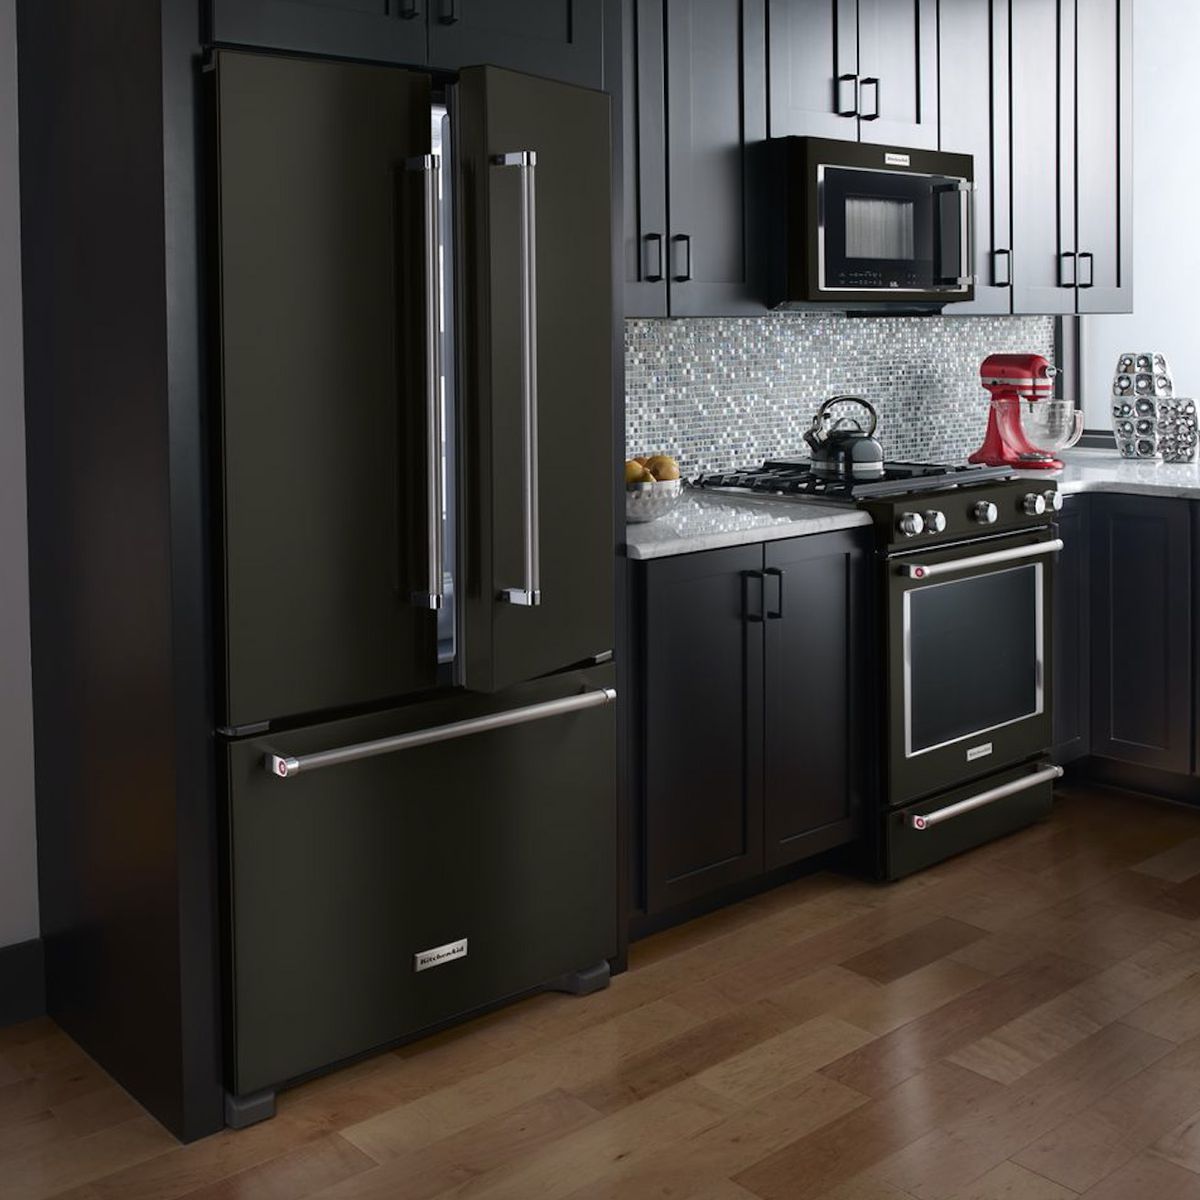 Look at These Beautiful Matte Black Major Appliances Refrigerator ...